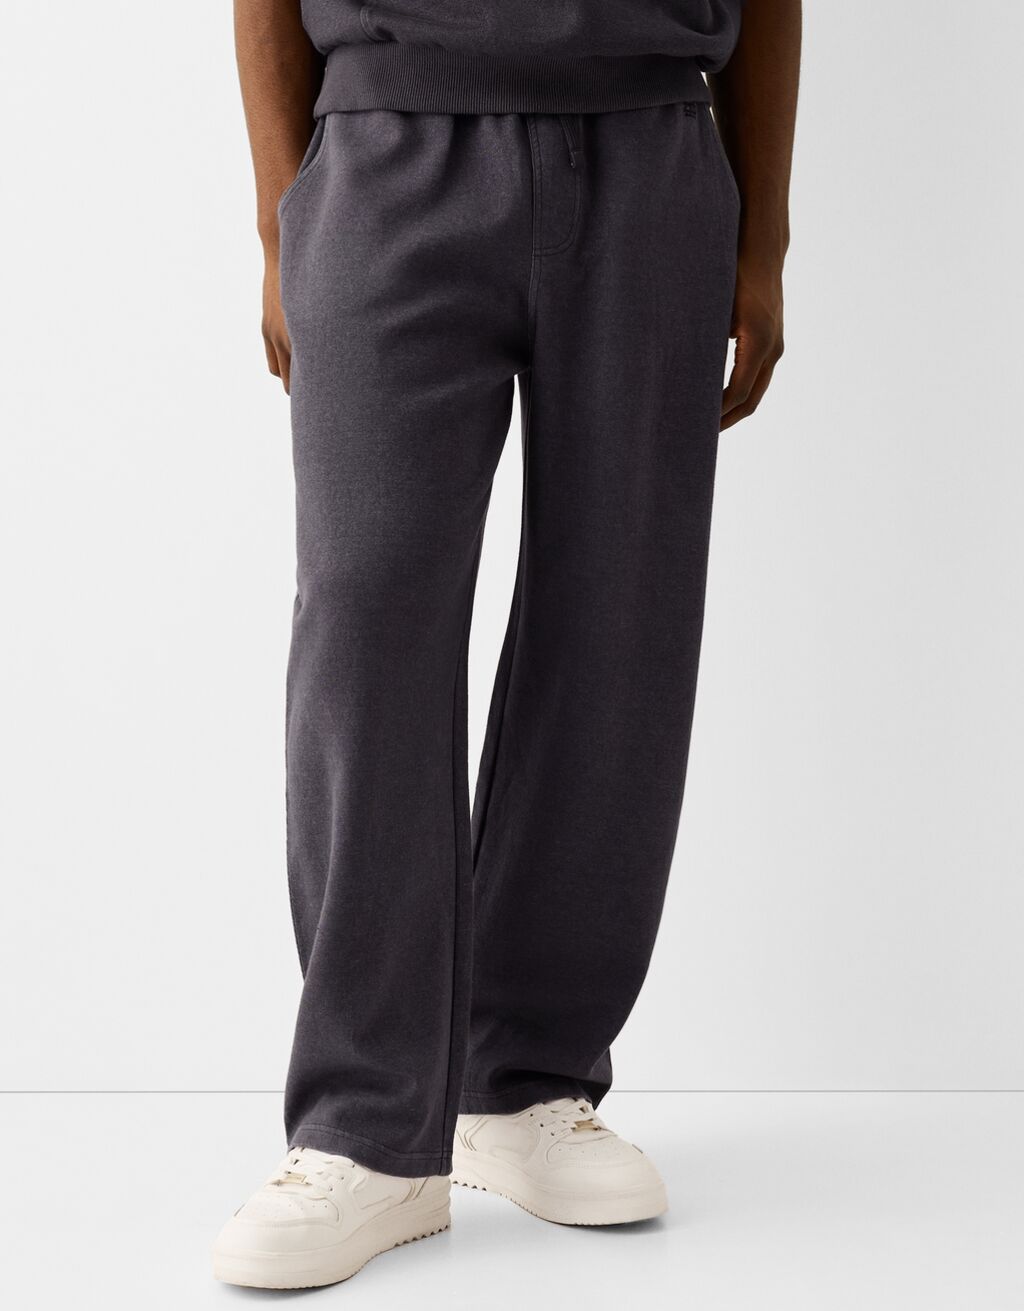 Faded Repaired Trousers 30W 28L | frenchworkwear